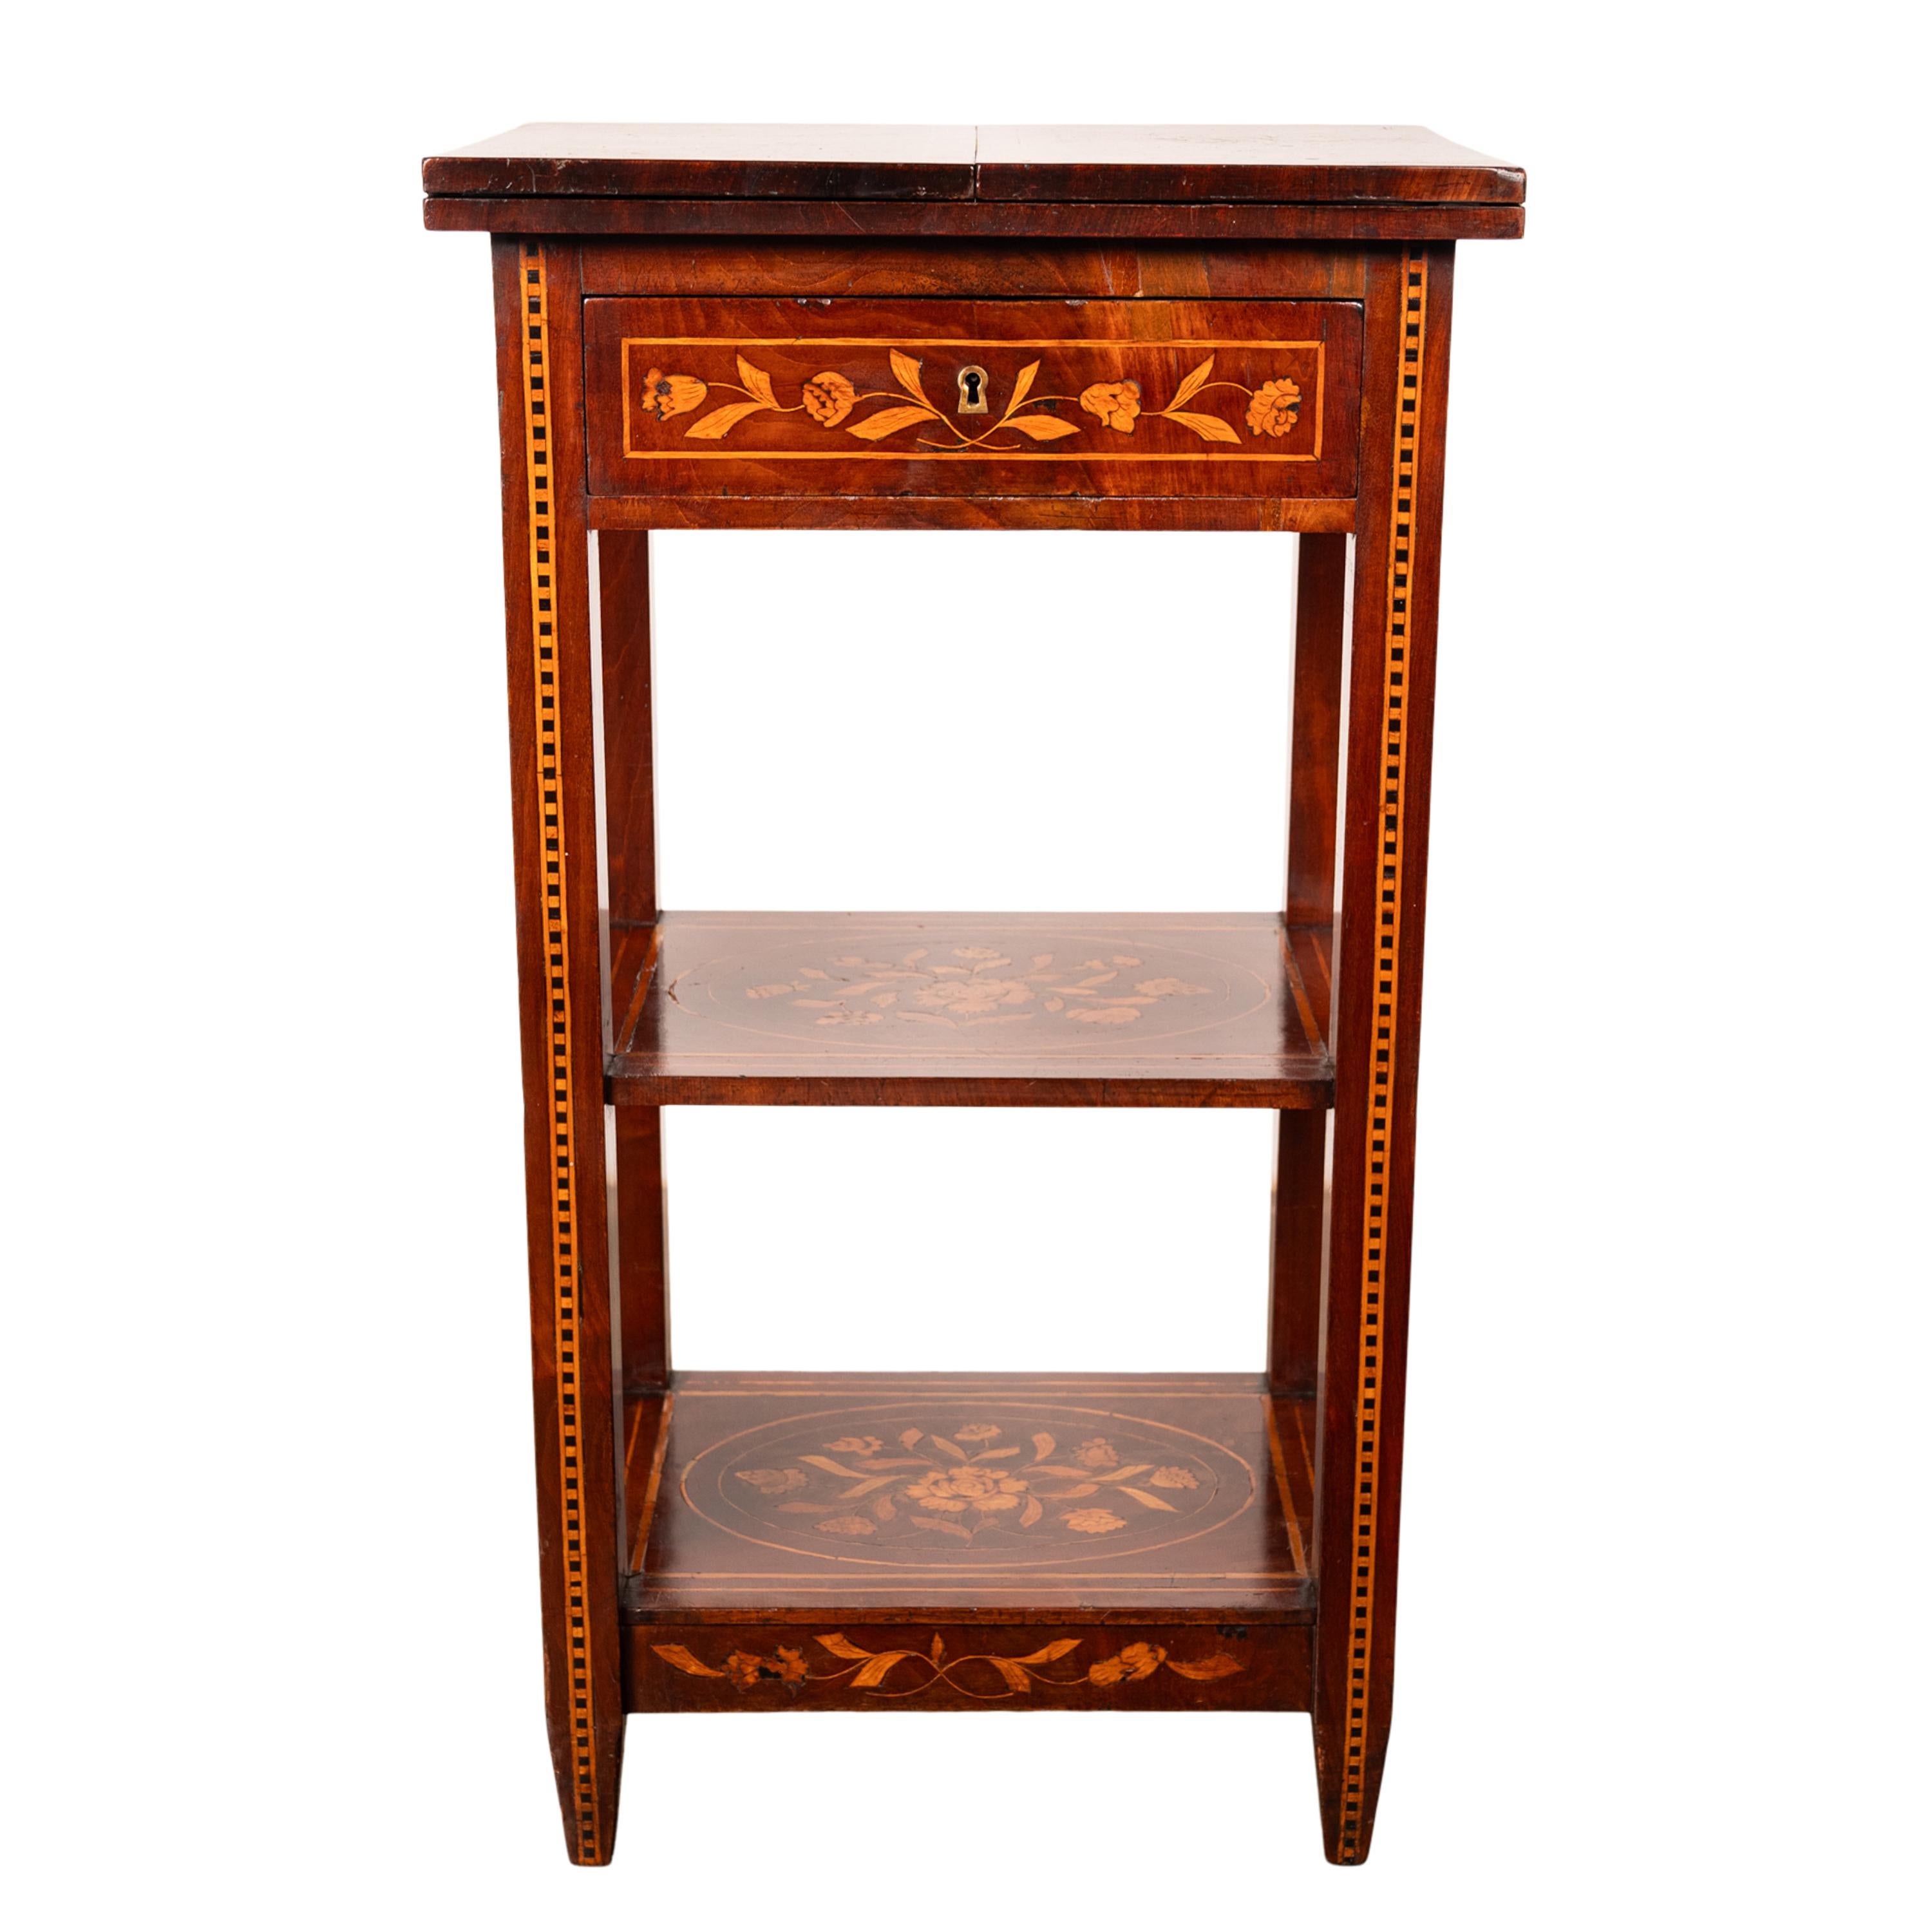 Antique Dutch Georgian Marquetry Foldout Rosewood Satinwood Table Etagere 1820 For Sale 1